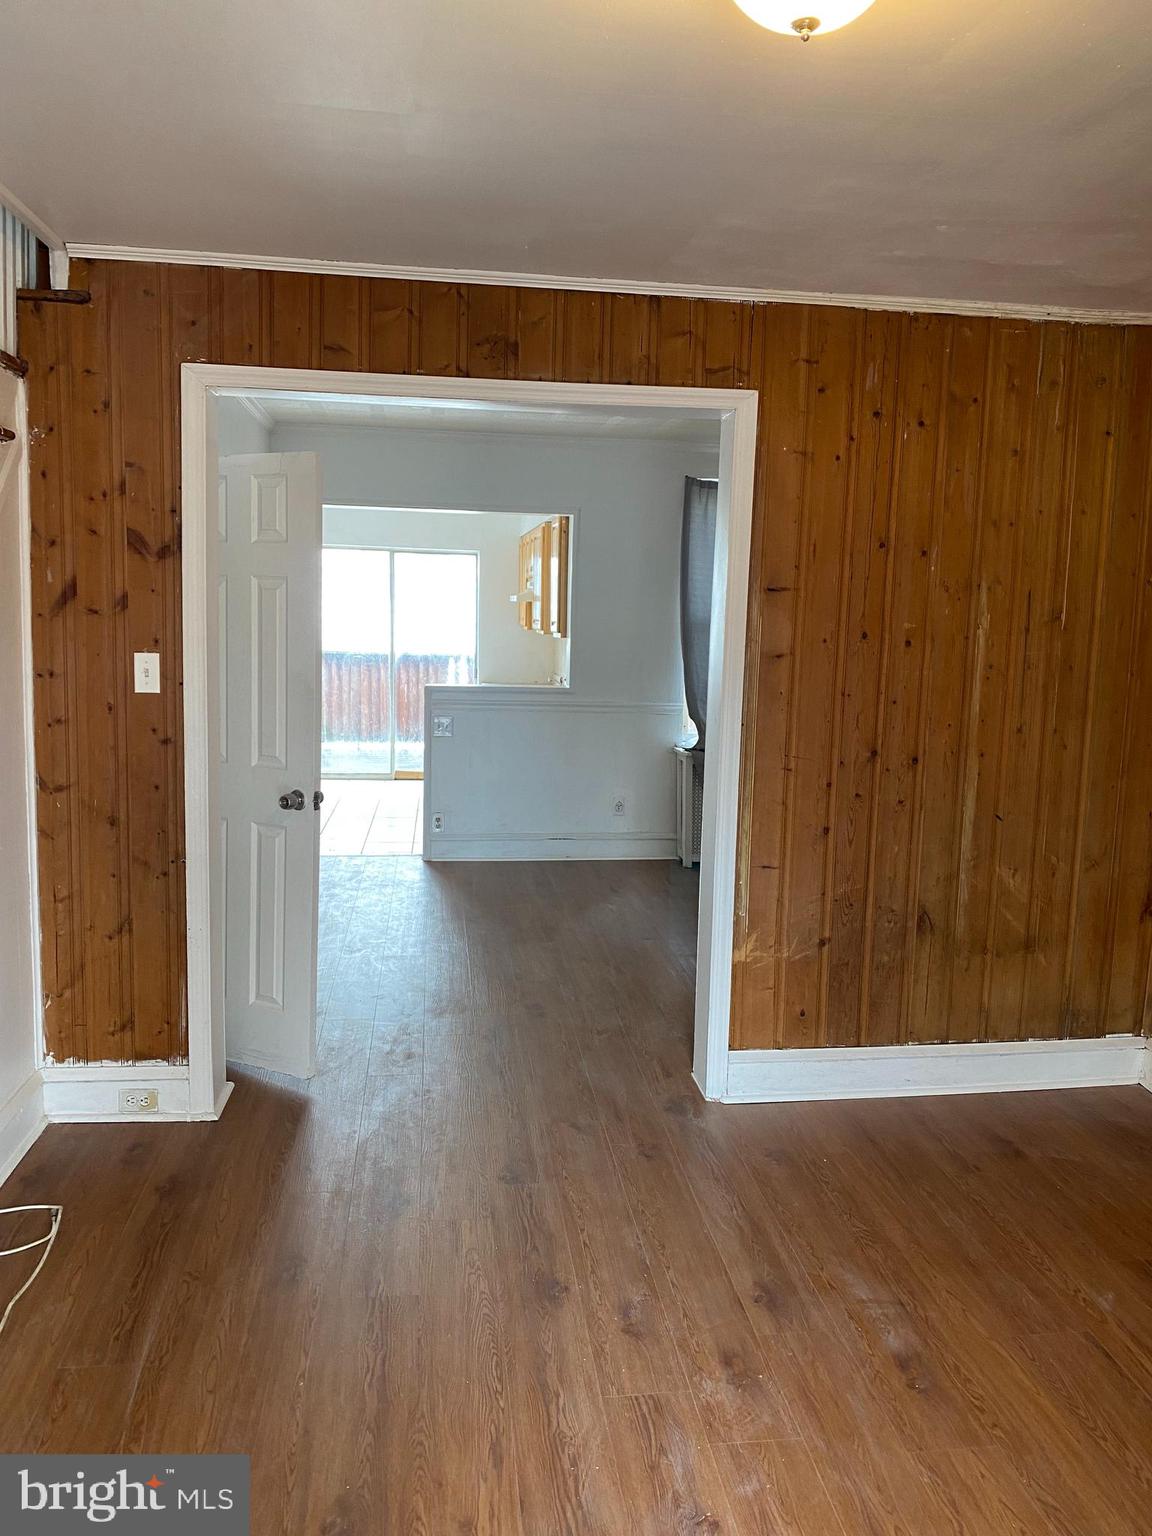 a view of a hallway with wooden floor and closet